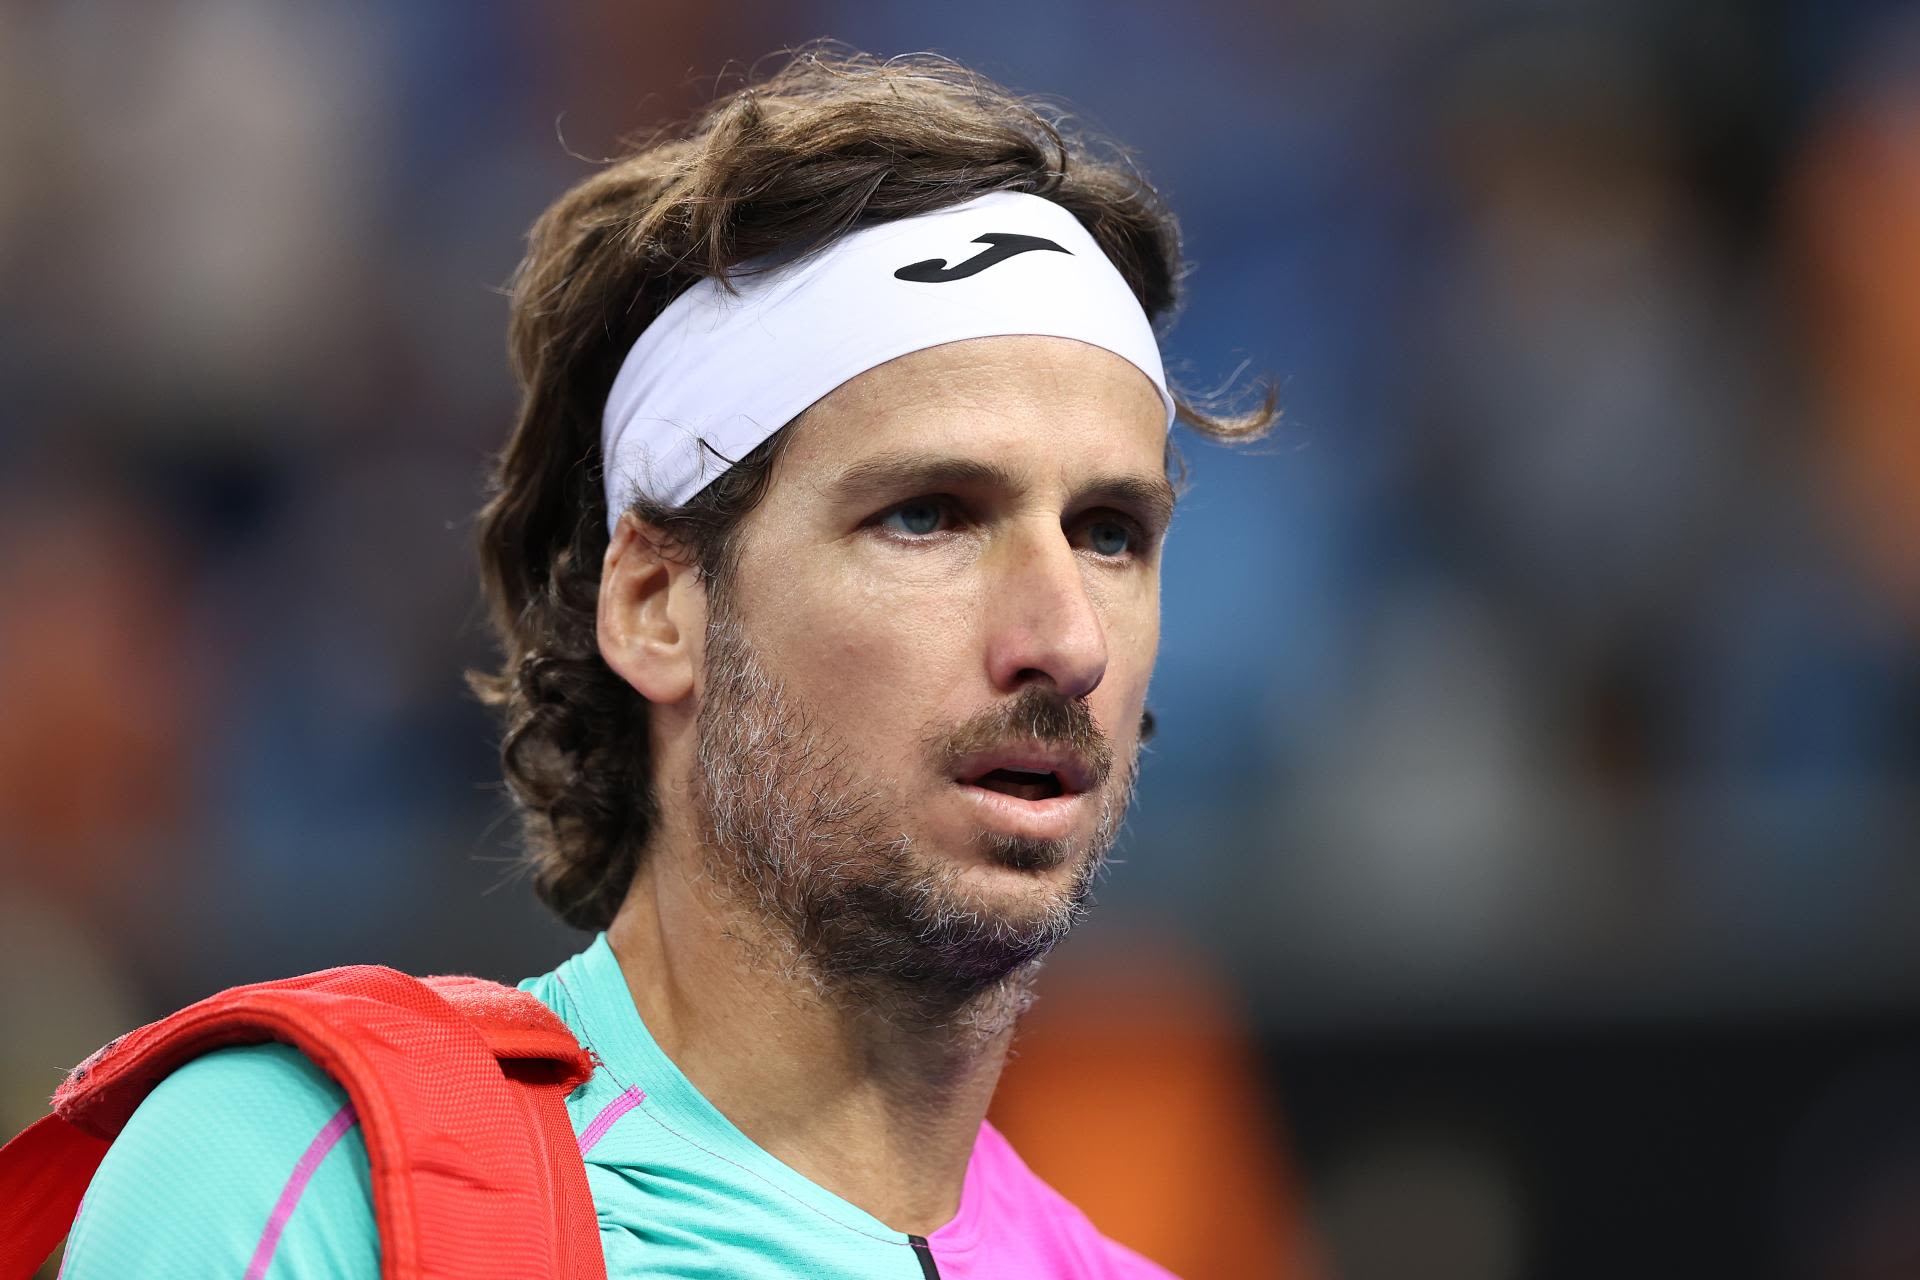 Madrid TD Feliciano Lopez hits back at Ons Jabeur after Tunisian's harsh criticism